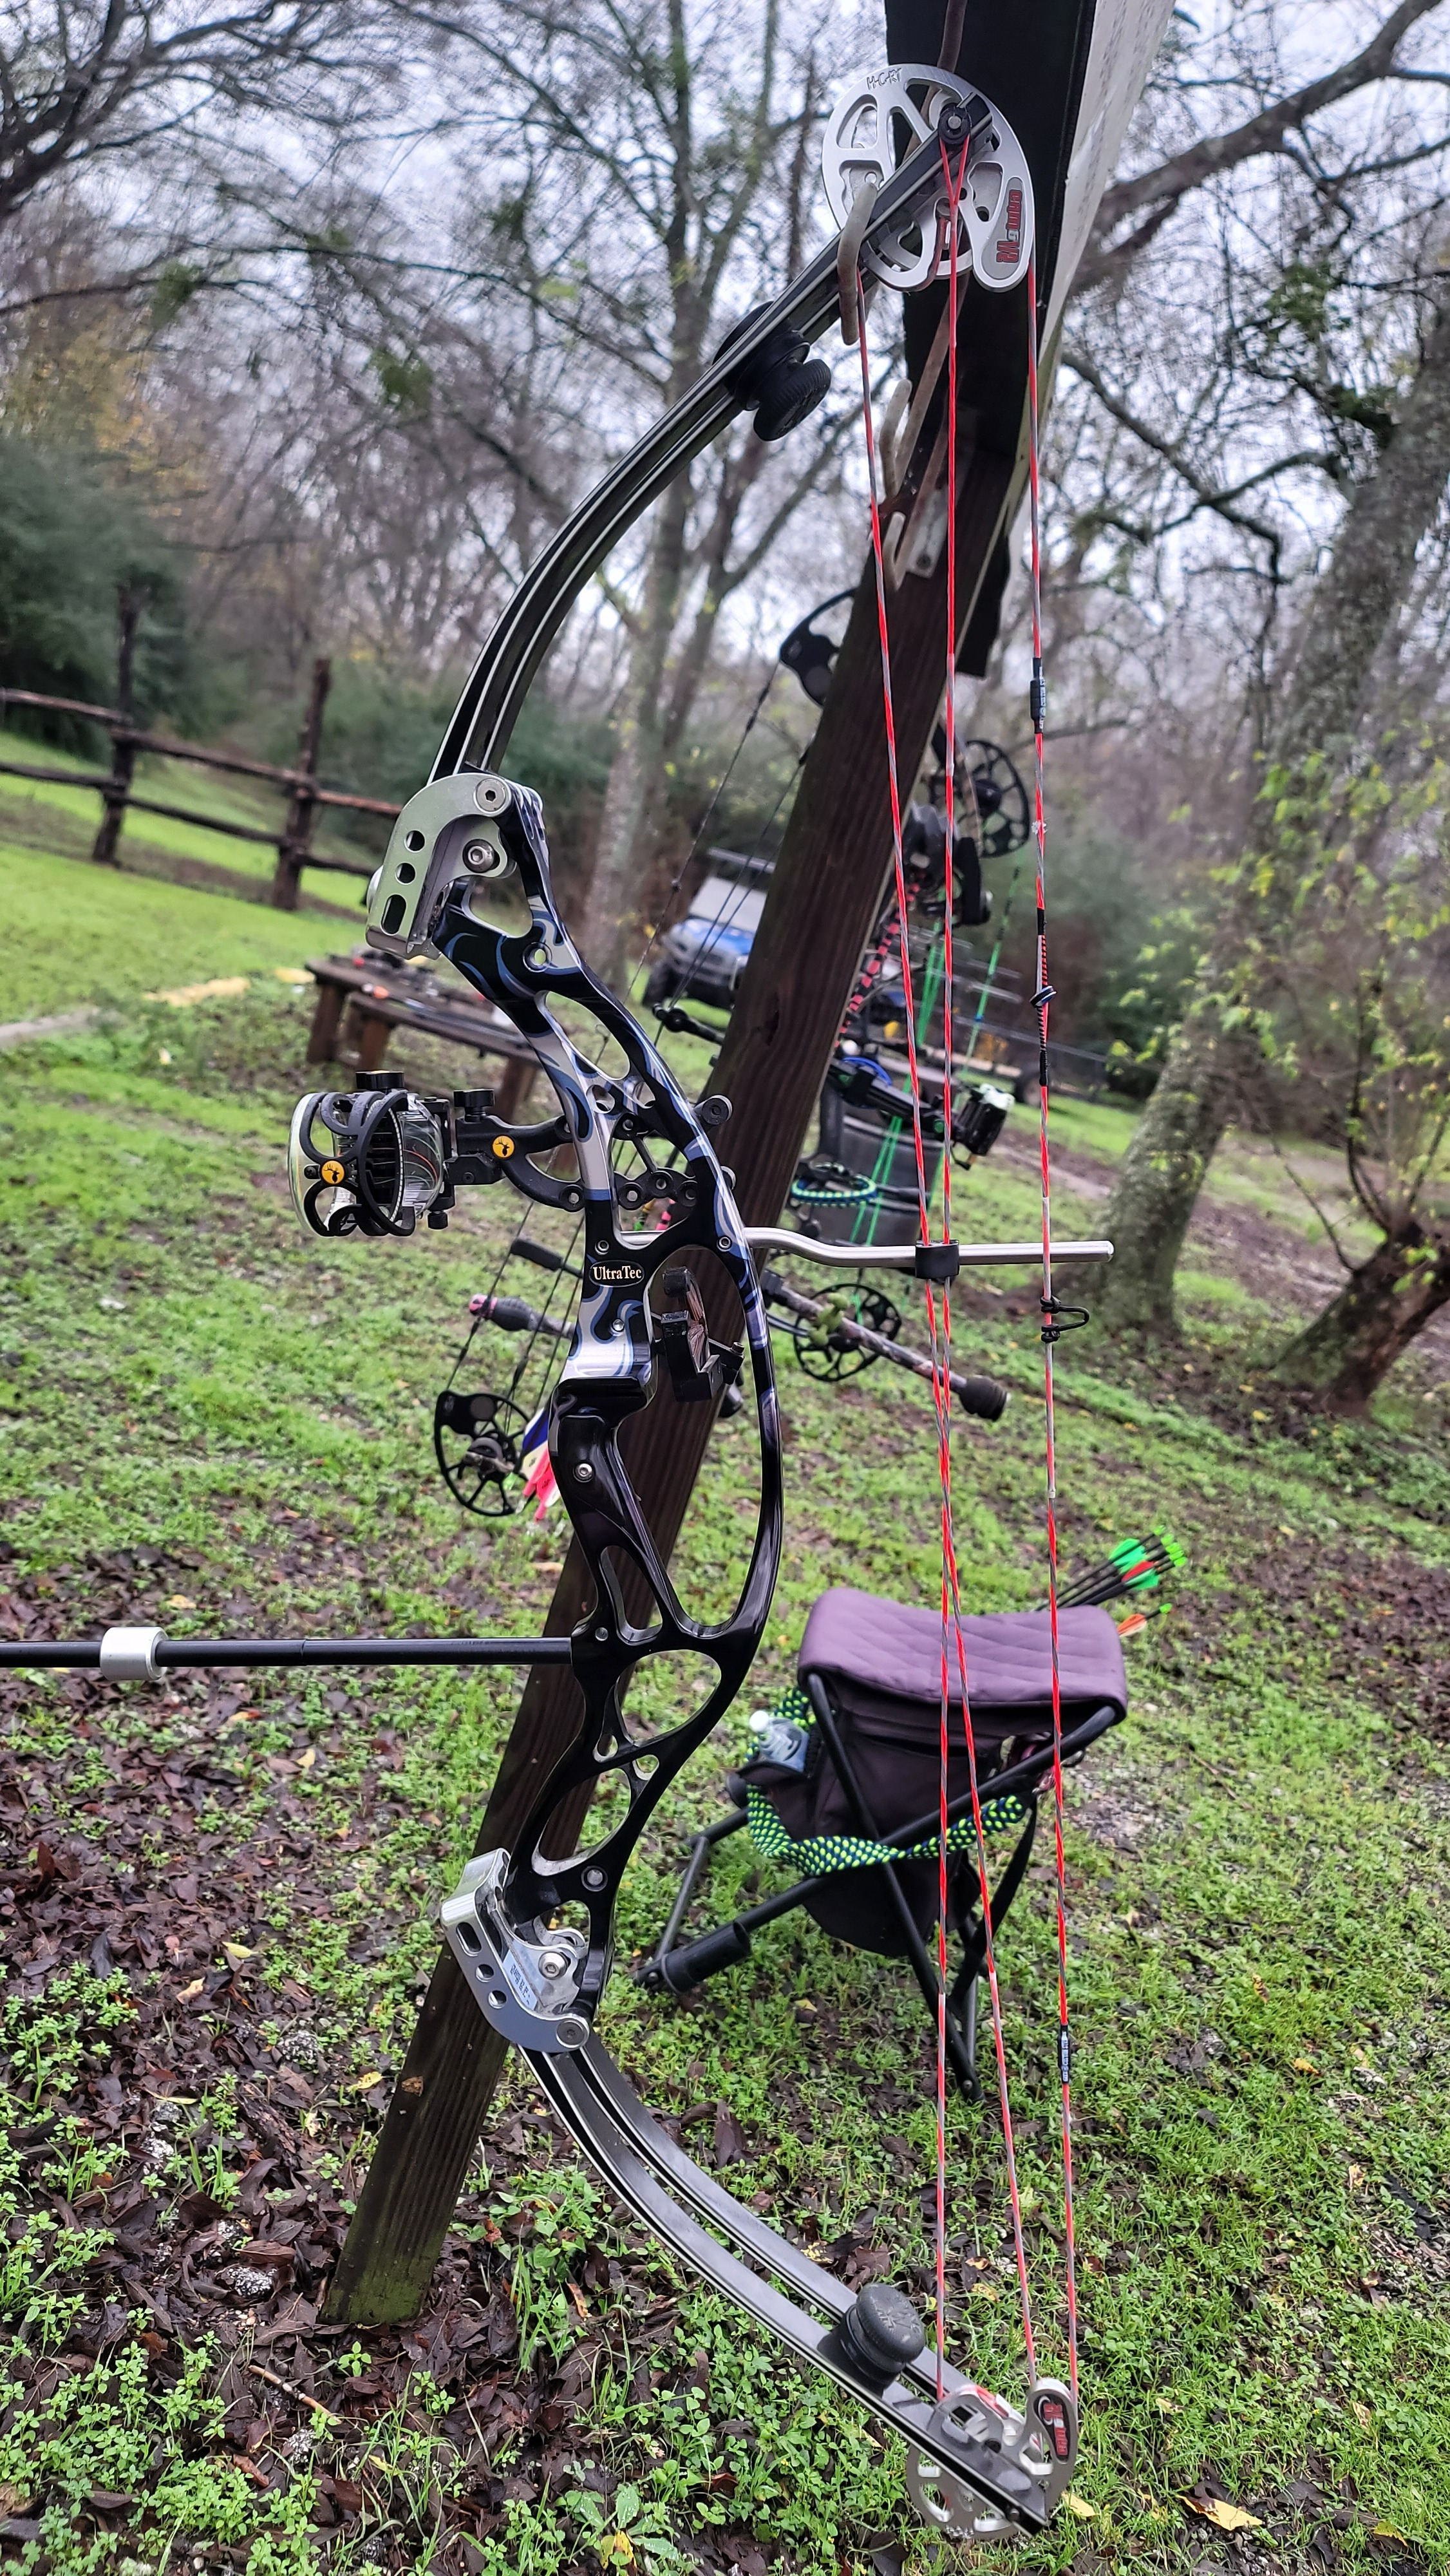 Custom bow strings by 60X Custom Strings are an affordable archery cost that make your bow look great out in the field